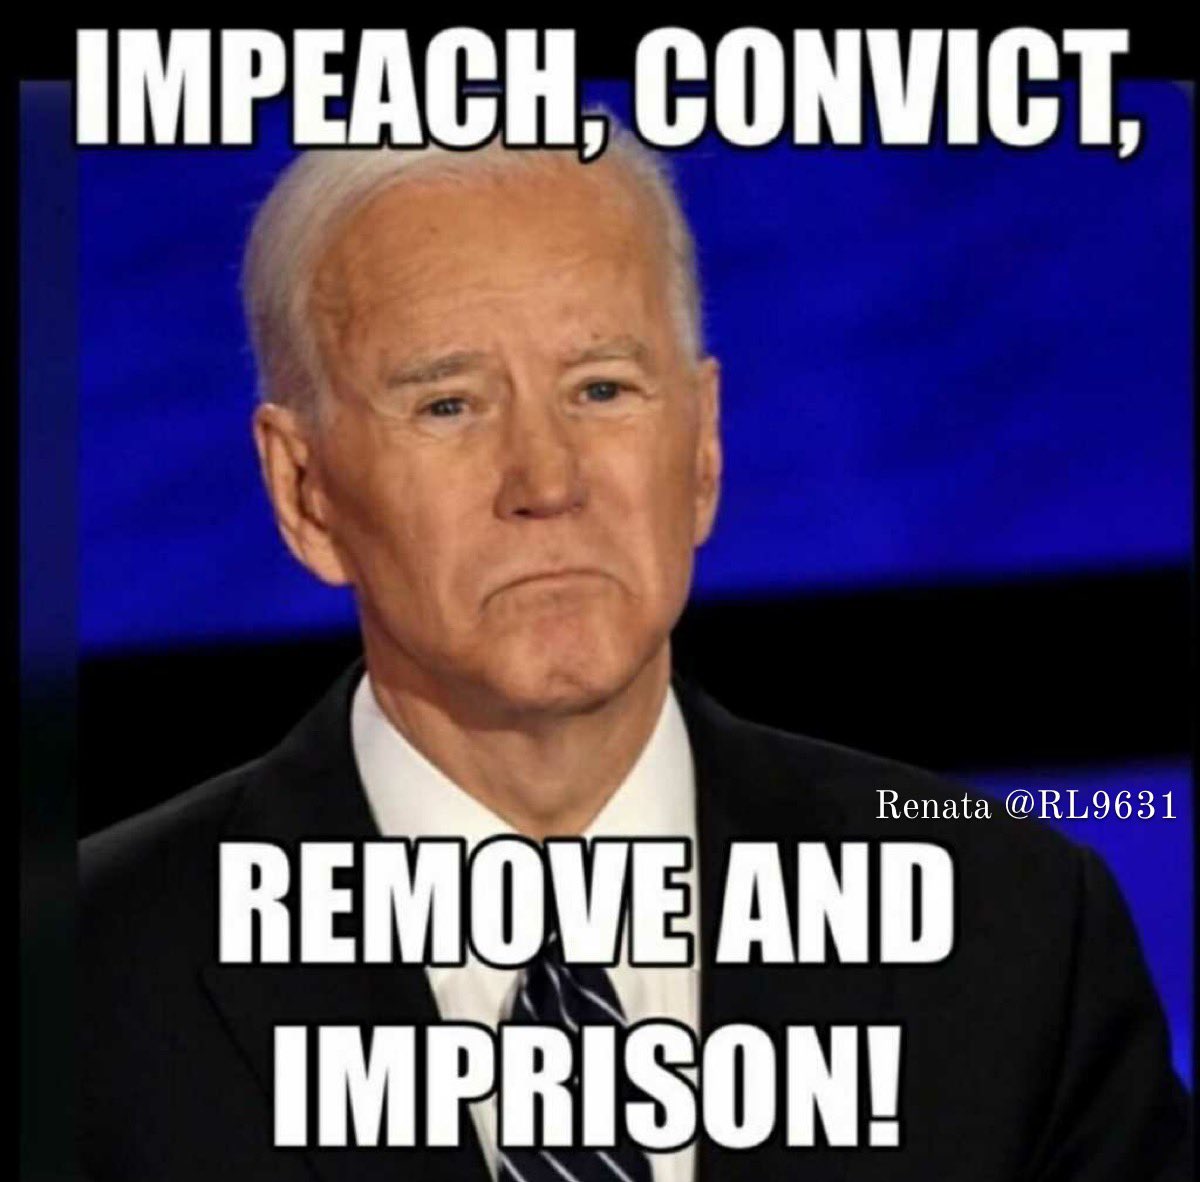 Biden is a TRAITOR to America! Repost if you agree.